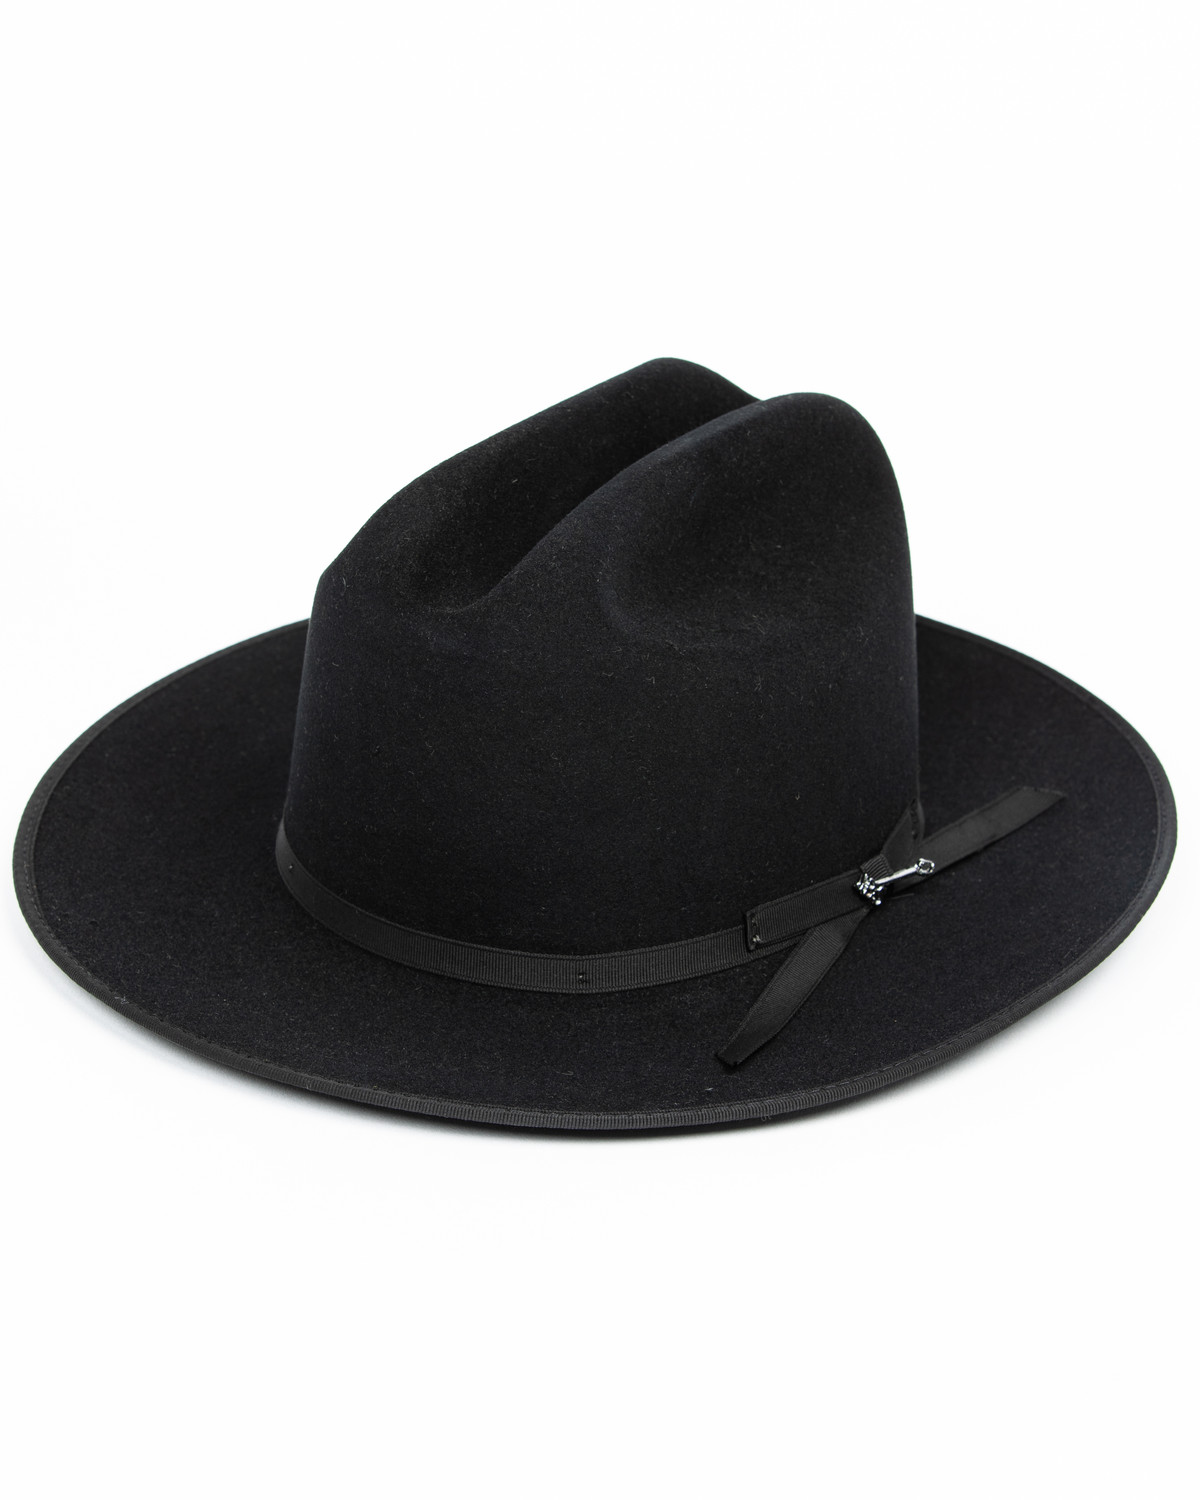 Stetson Hats and Apparel - Over 30,000 items & 300 styles of